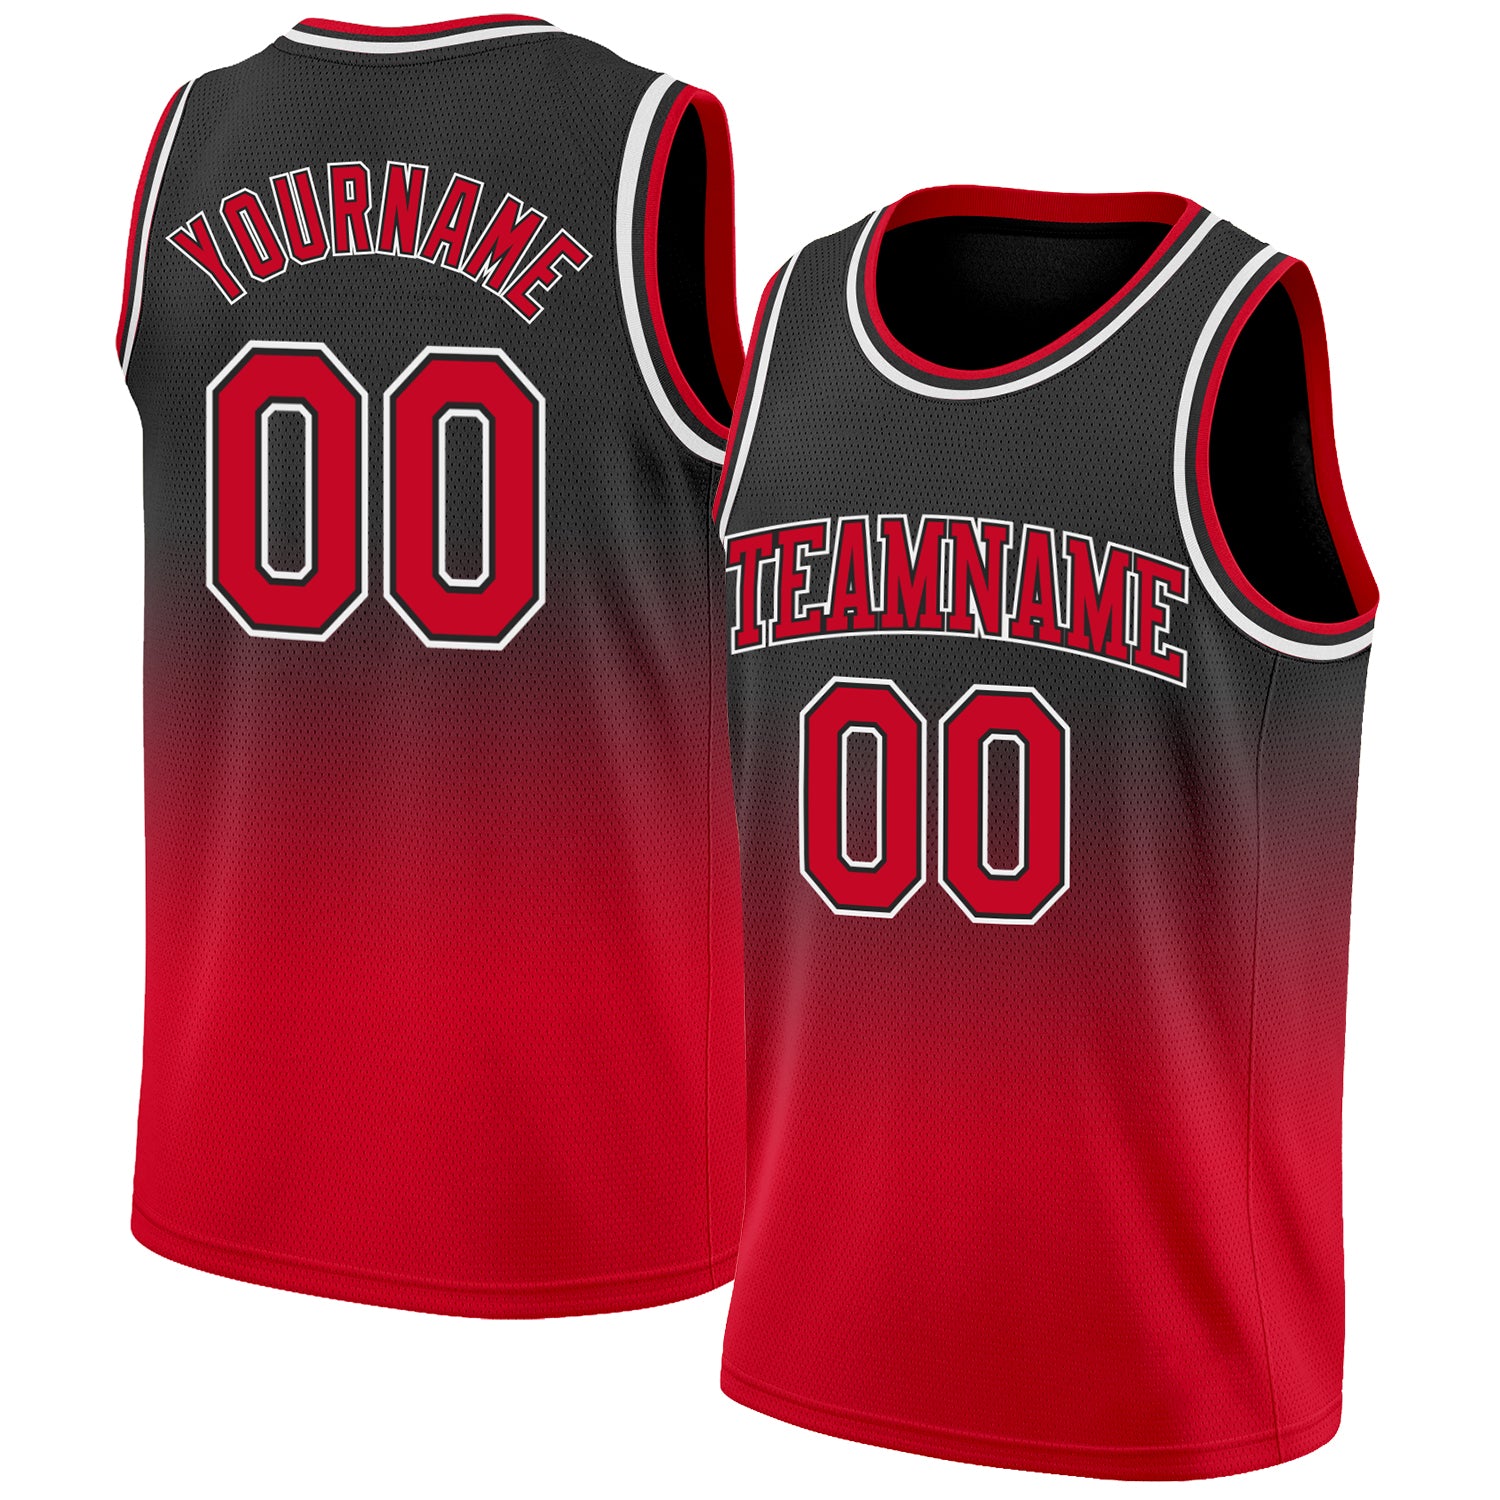 Black and Red Jersey